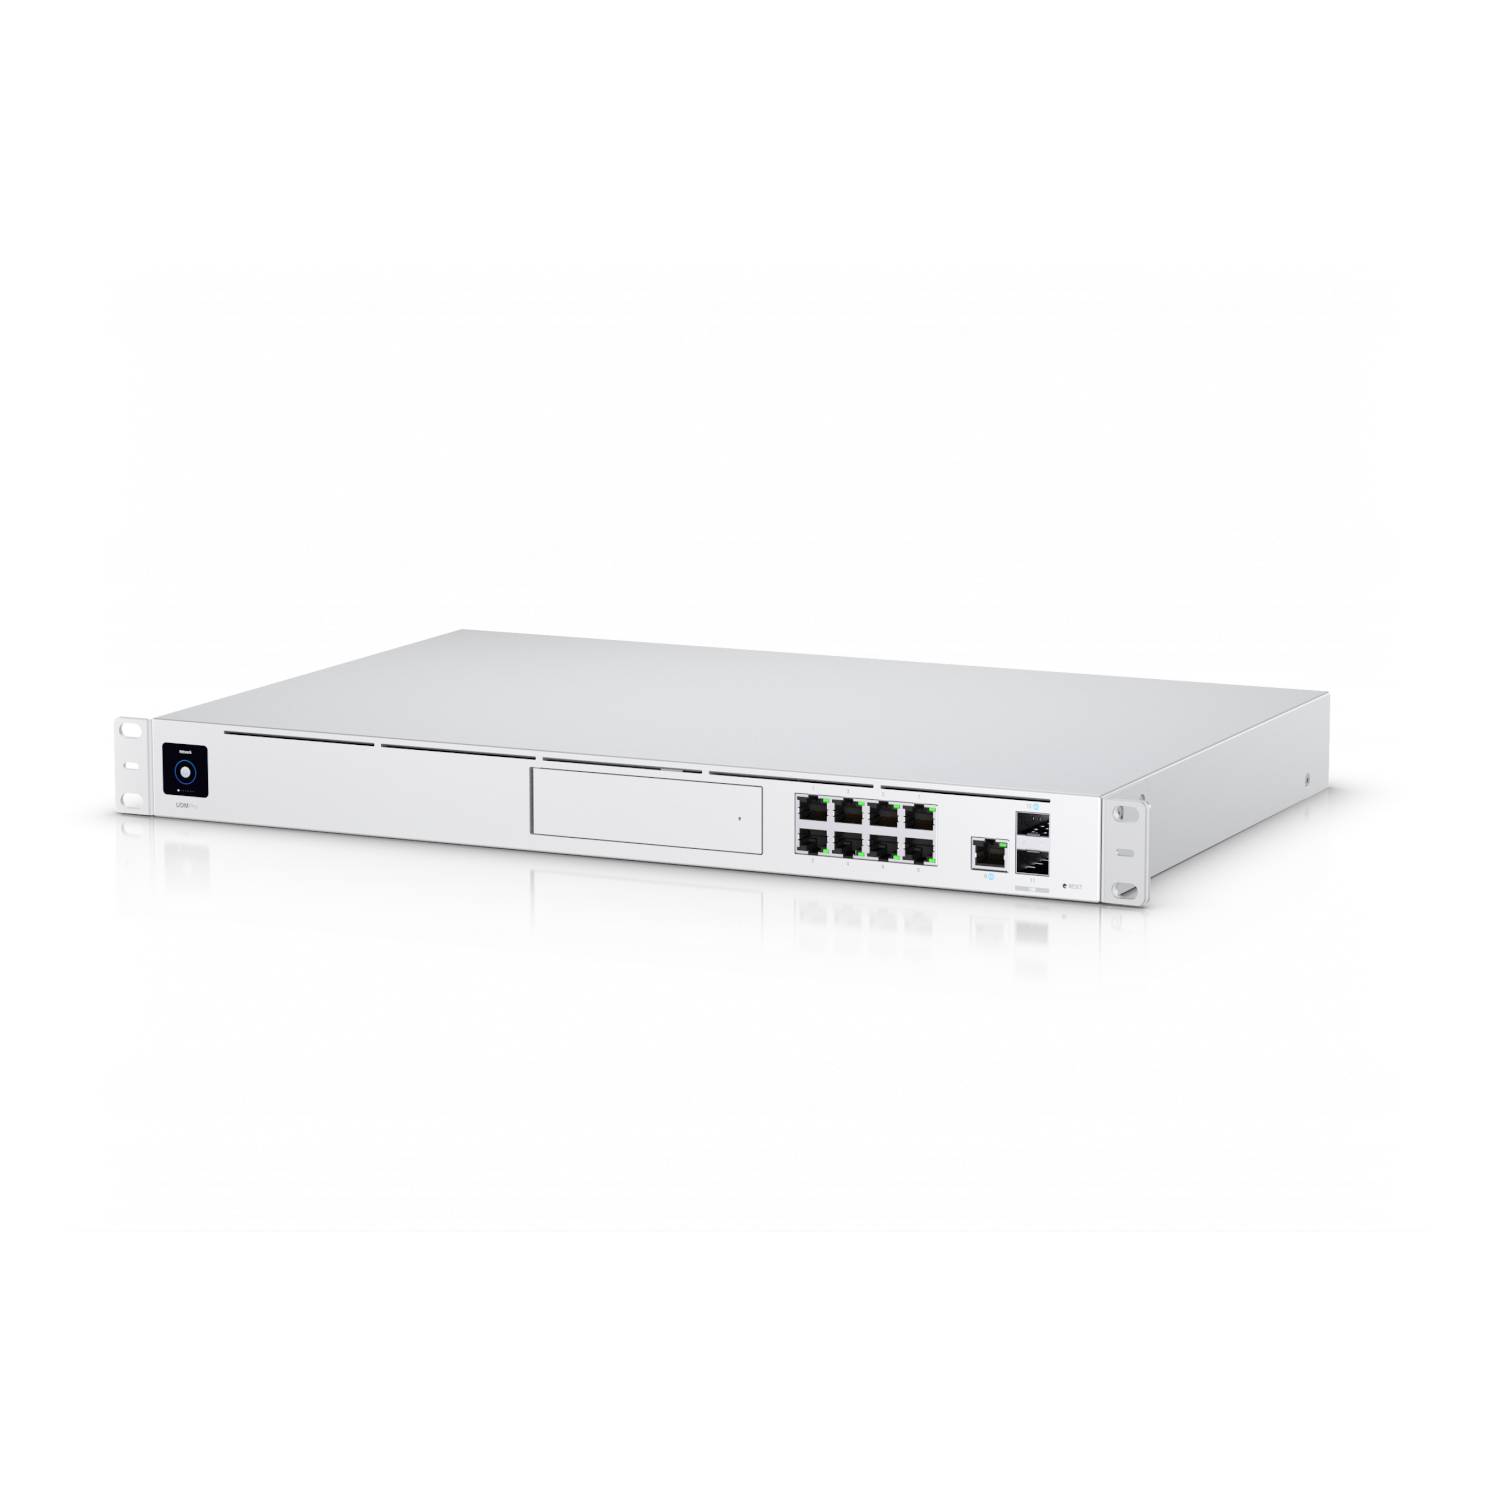 UDM-Pro,UniFi Dream Machine Pro อุปกรณ์ All in One Security Gateway และ UniFi SDN Controller